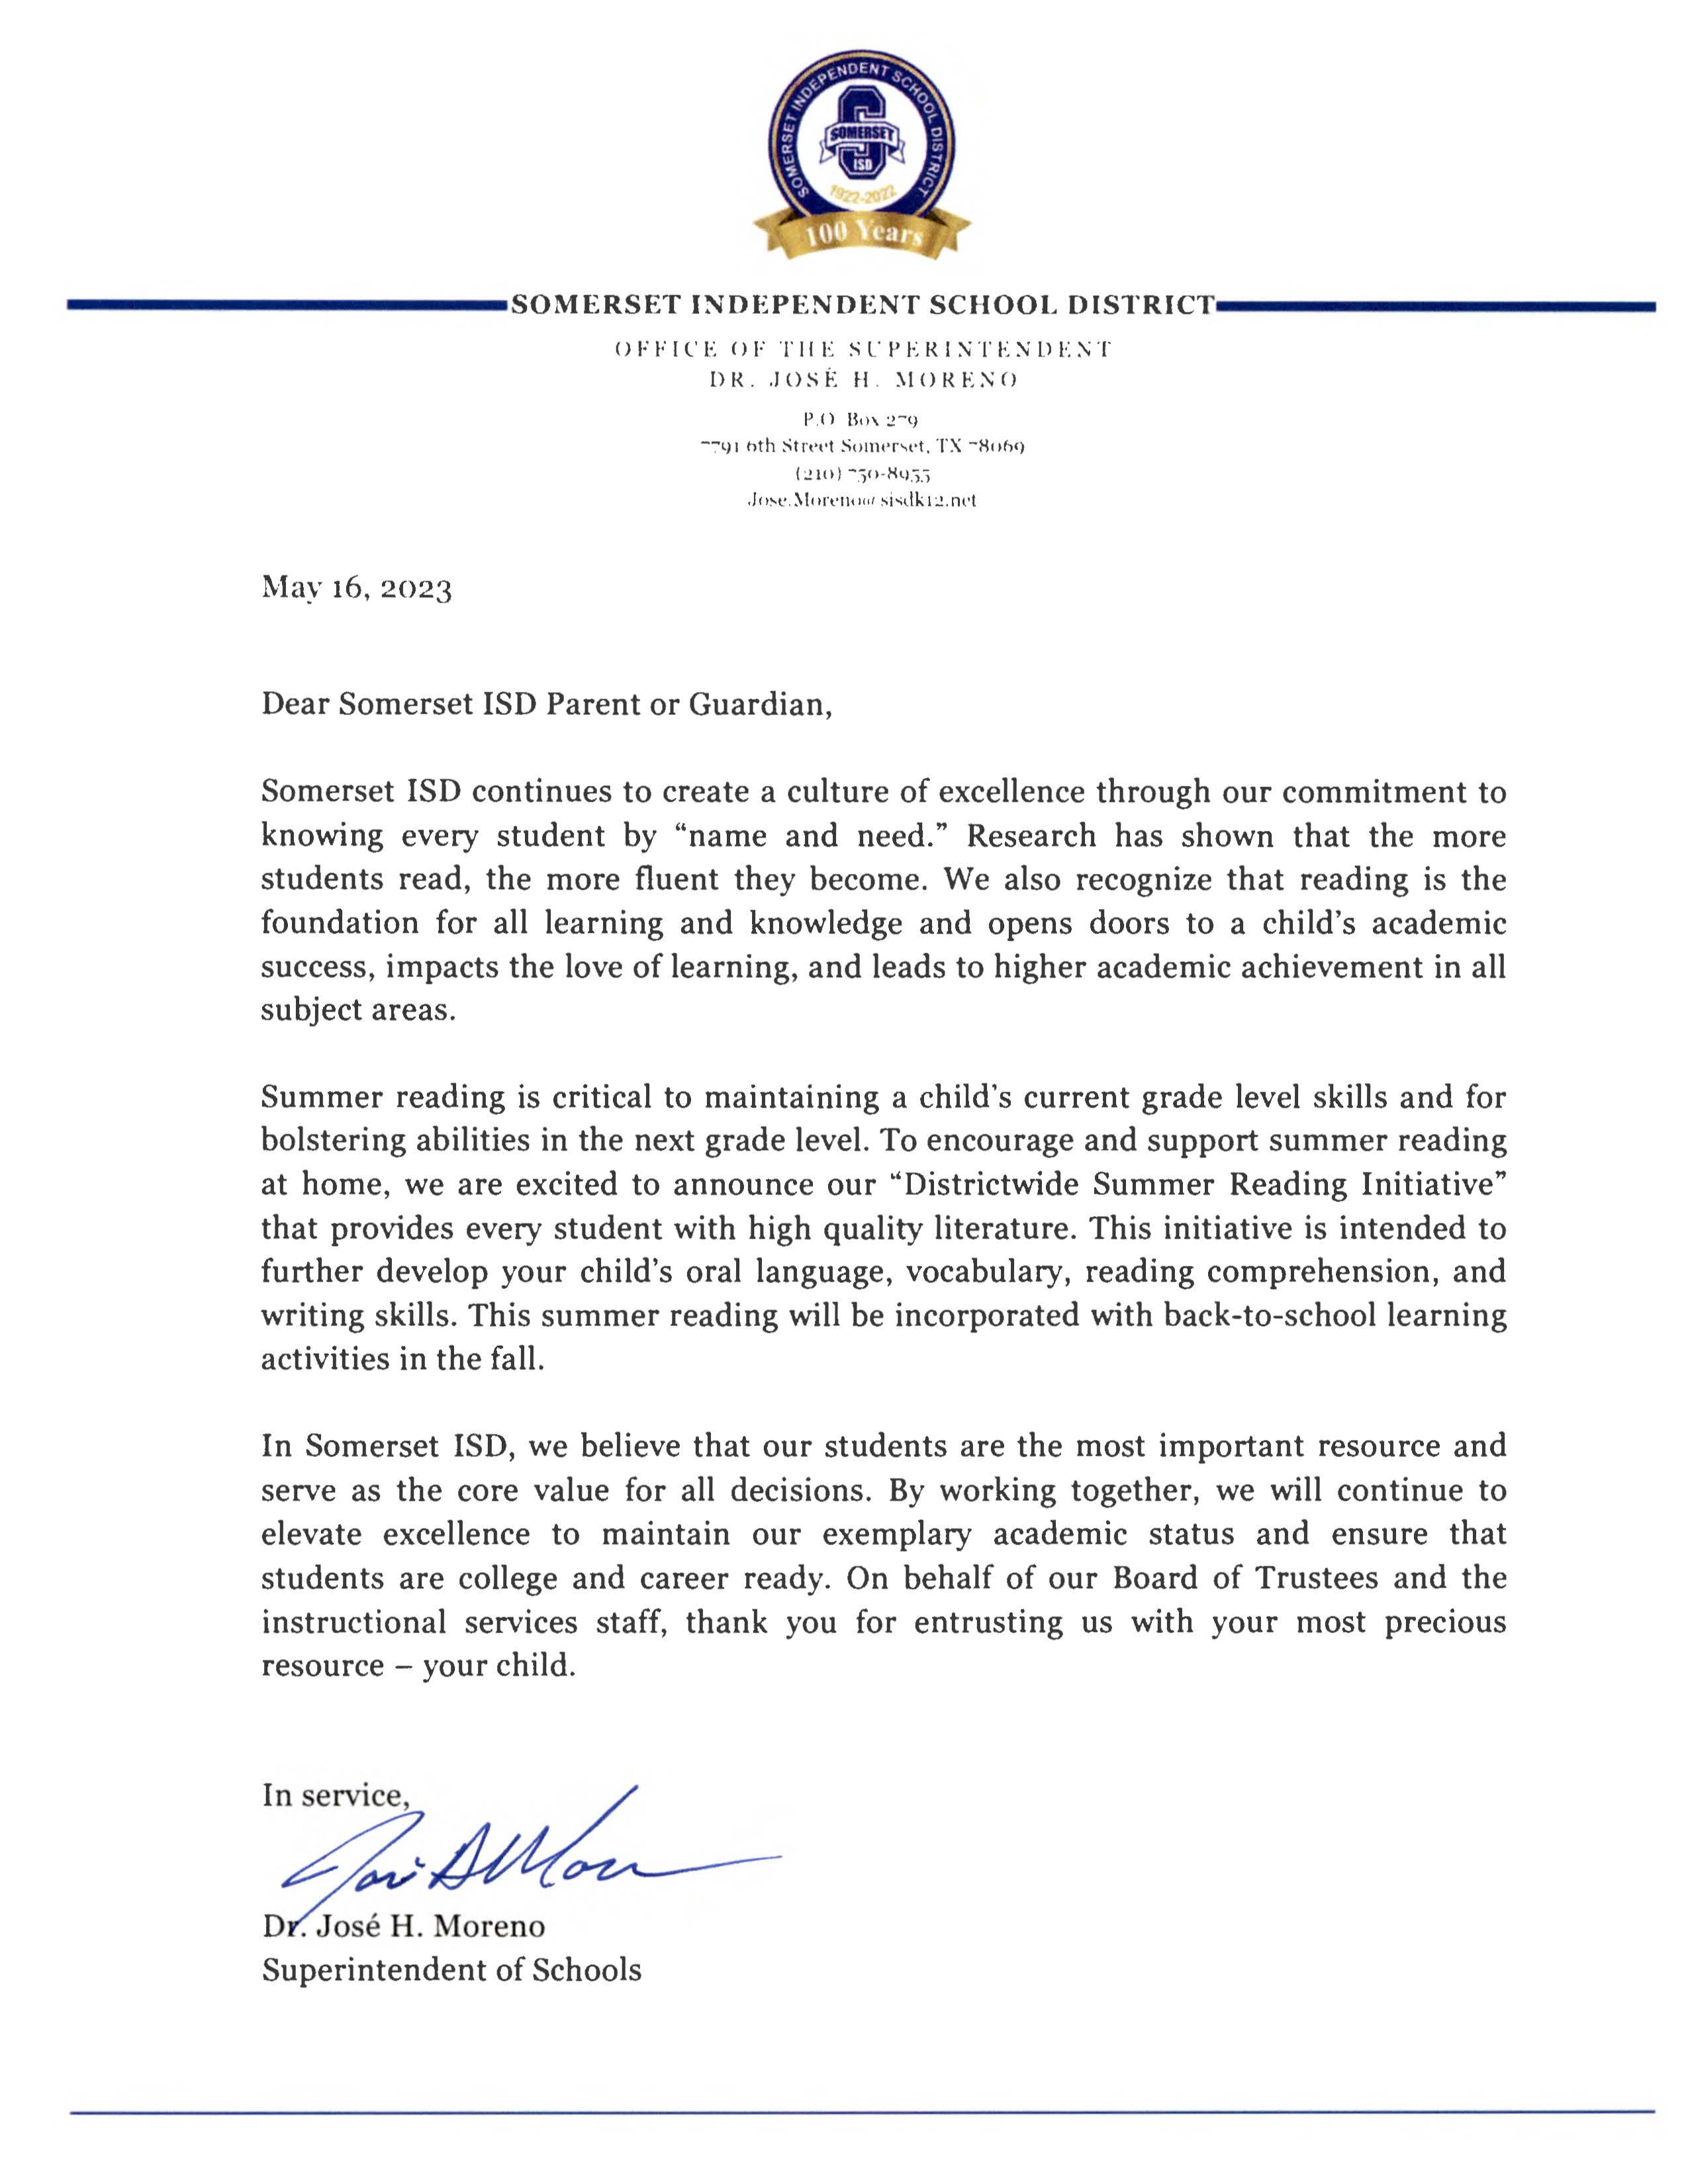 Letter from Dr. Moreno